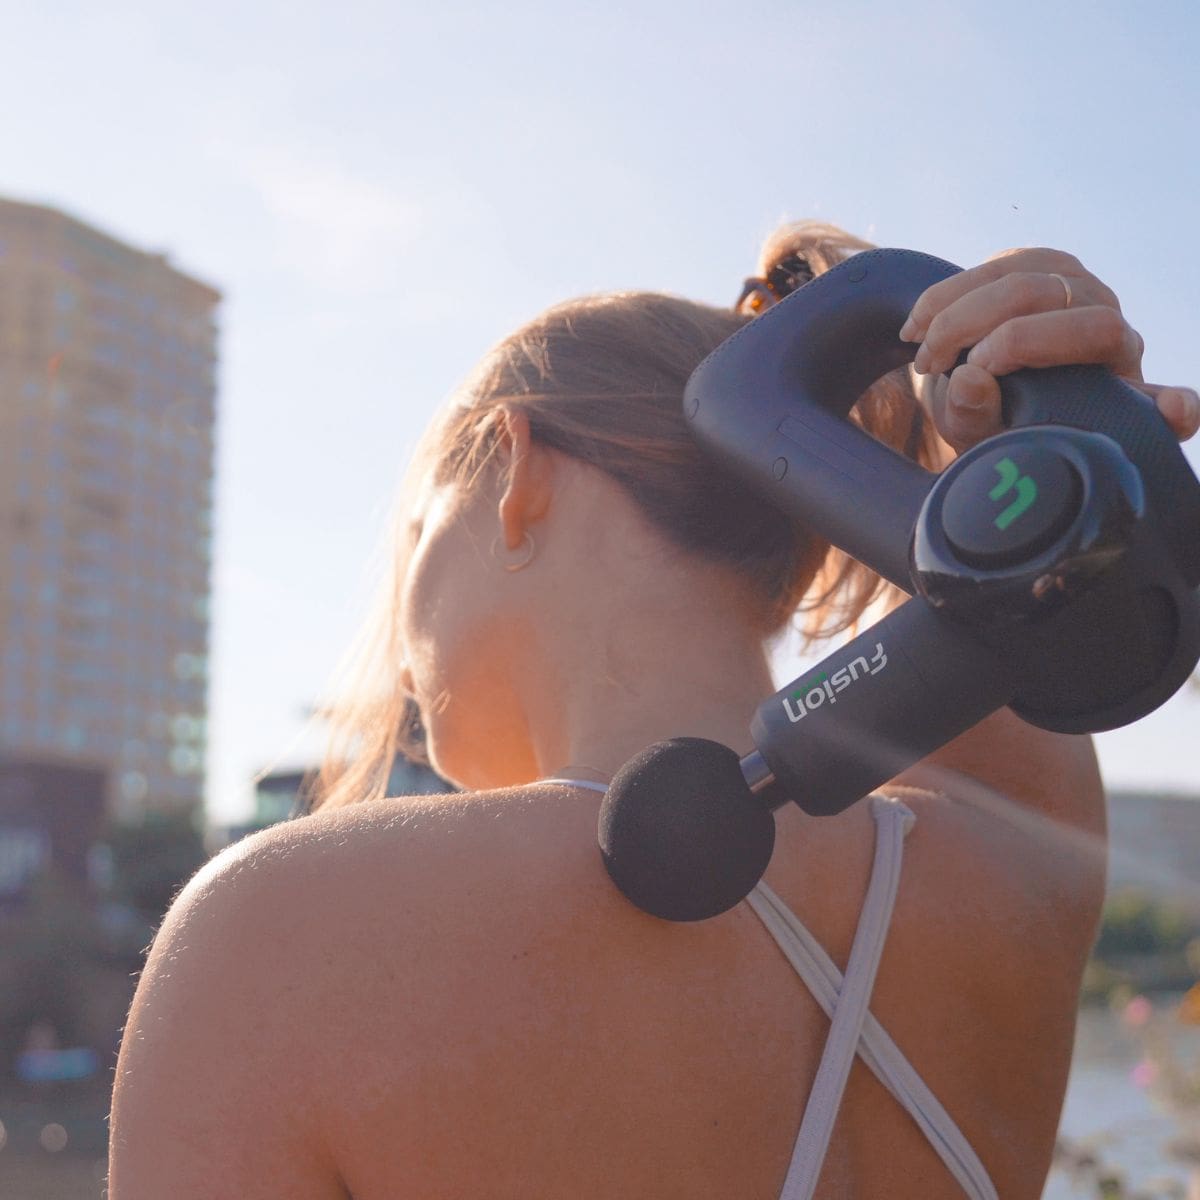 How to Use a Massage Gun on Your Back: A Step-by-Step Guide